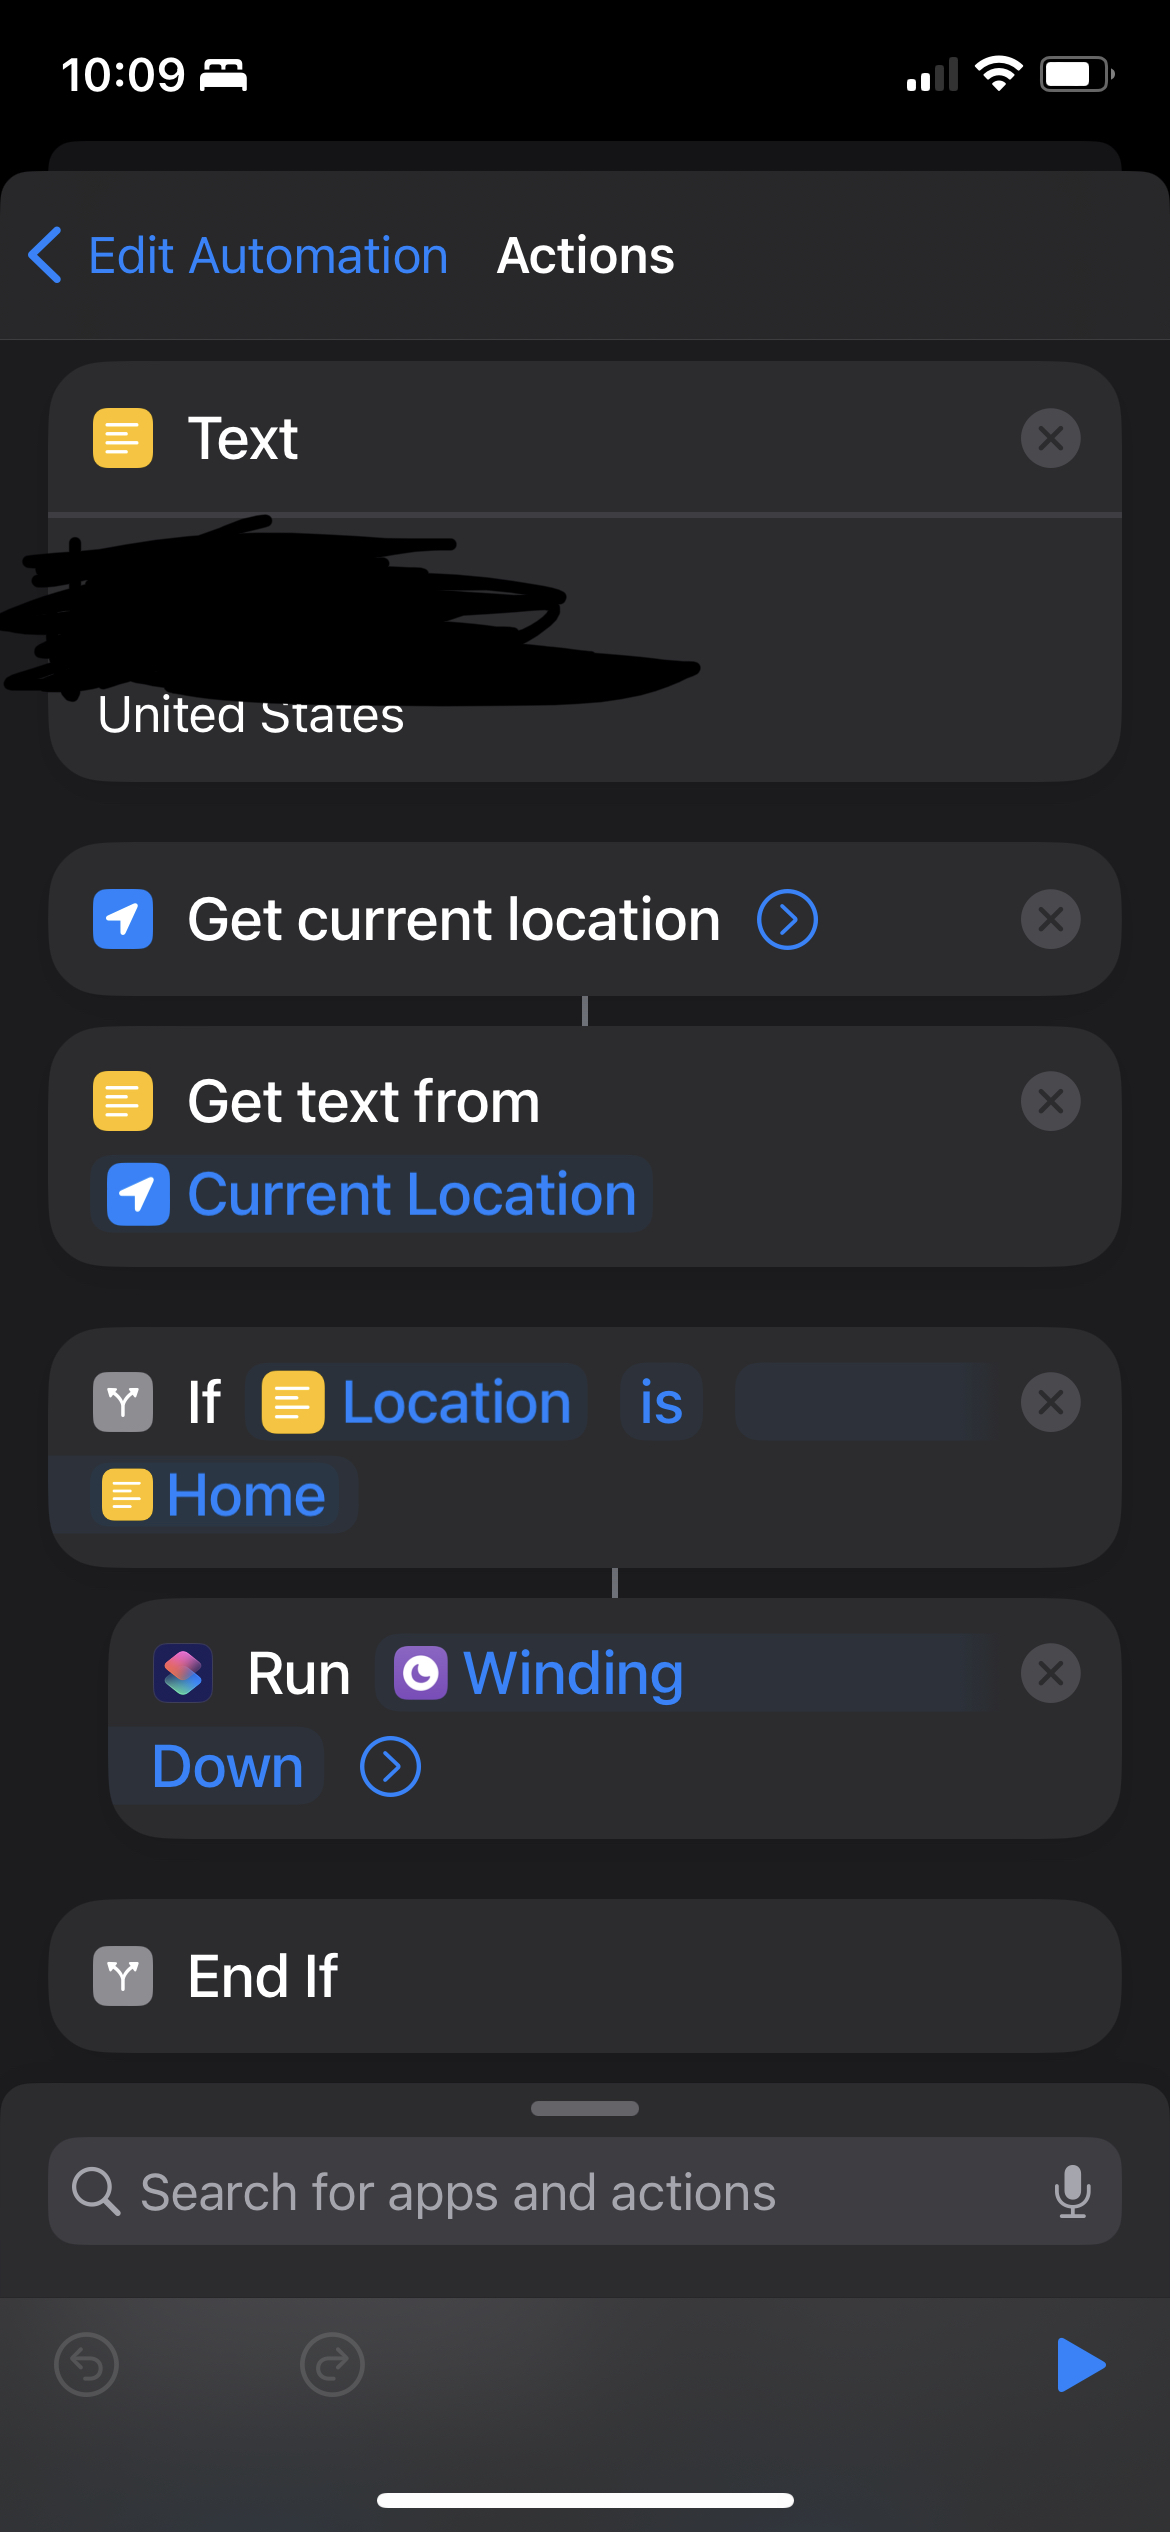 A screenshot of a Shortcut that compares the phone's current address to a static address and runs the 'Winding Down' shortcut if they match.